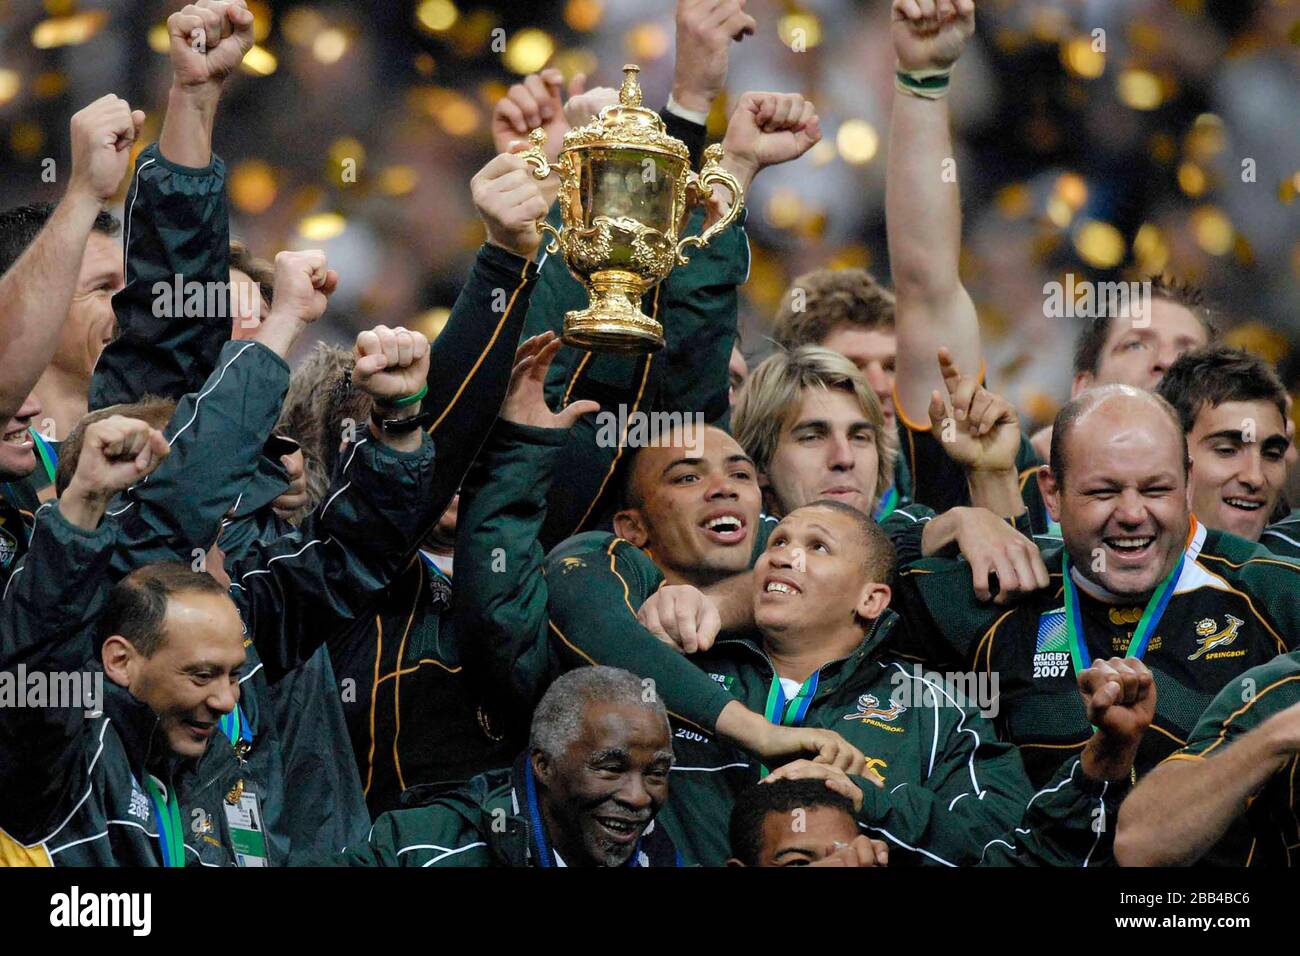 The Webb Ellis Trophy is held aloft by the South African team. The South African President, Thabo Mvuyelwa Mbeki, is at the bottom centre. (Bryan Haba Stock Photo